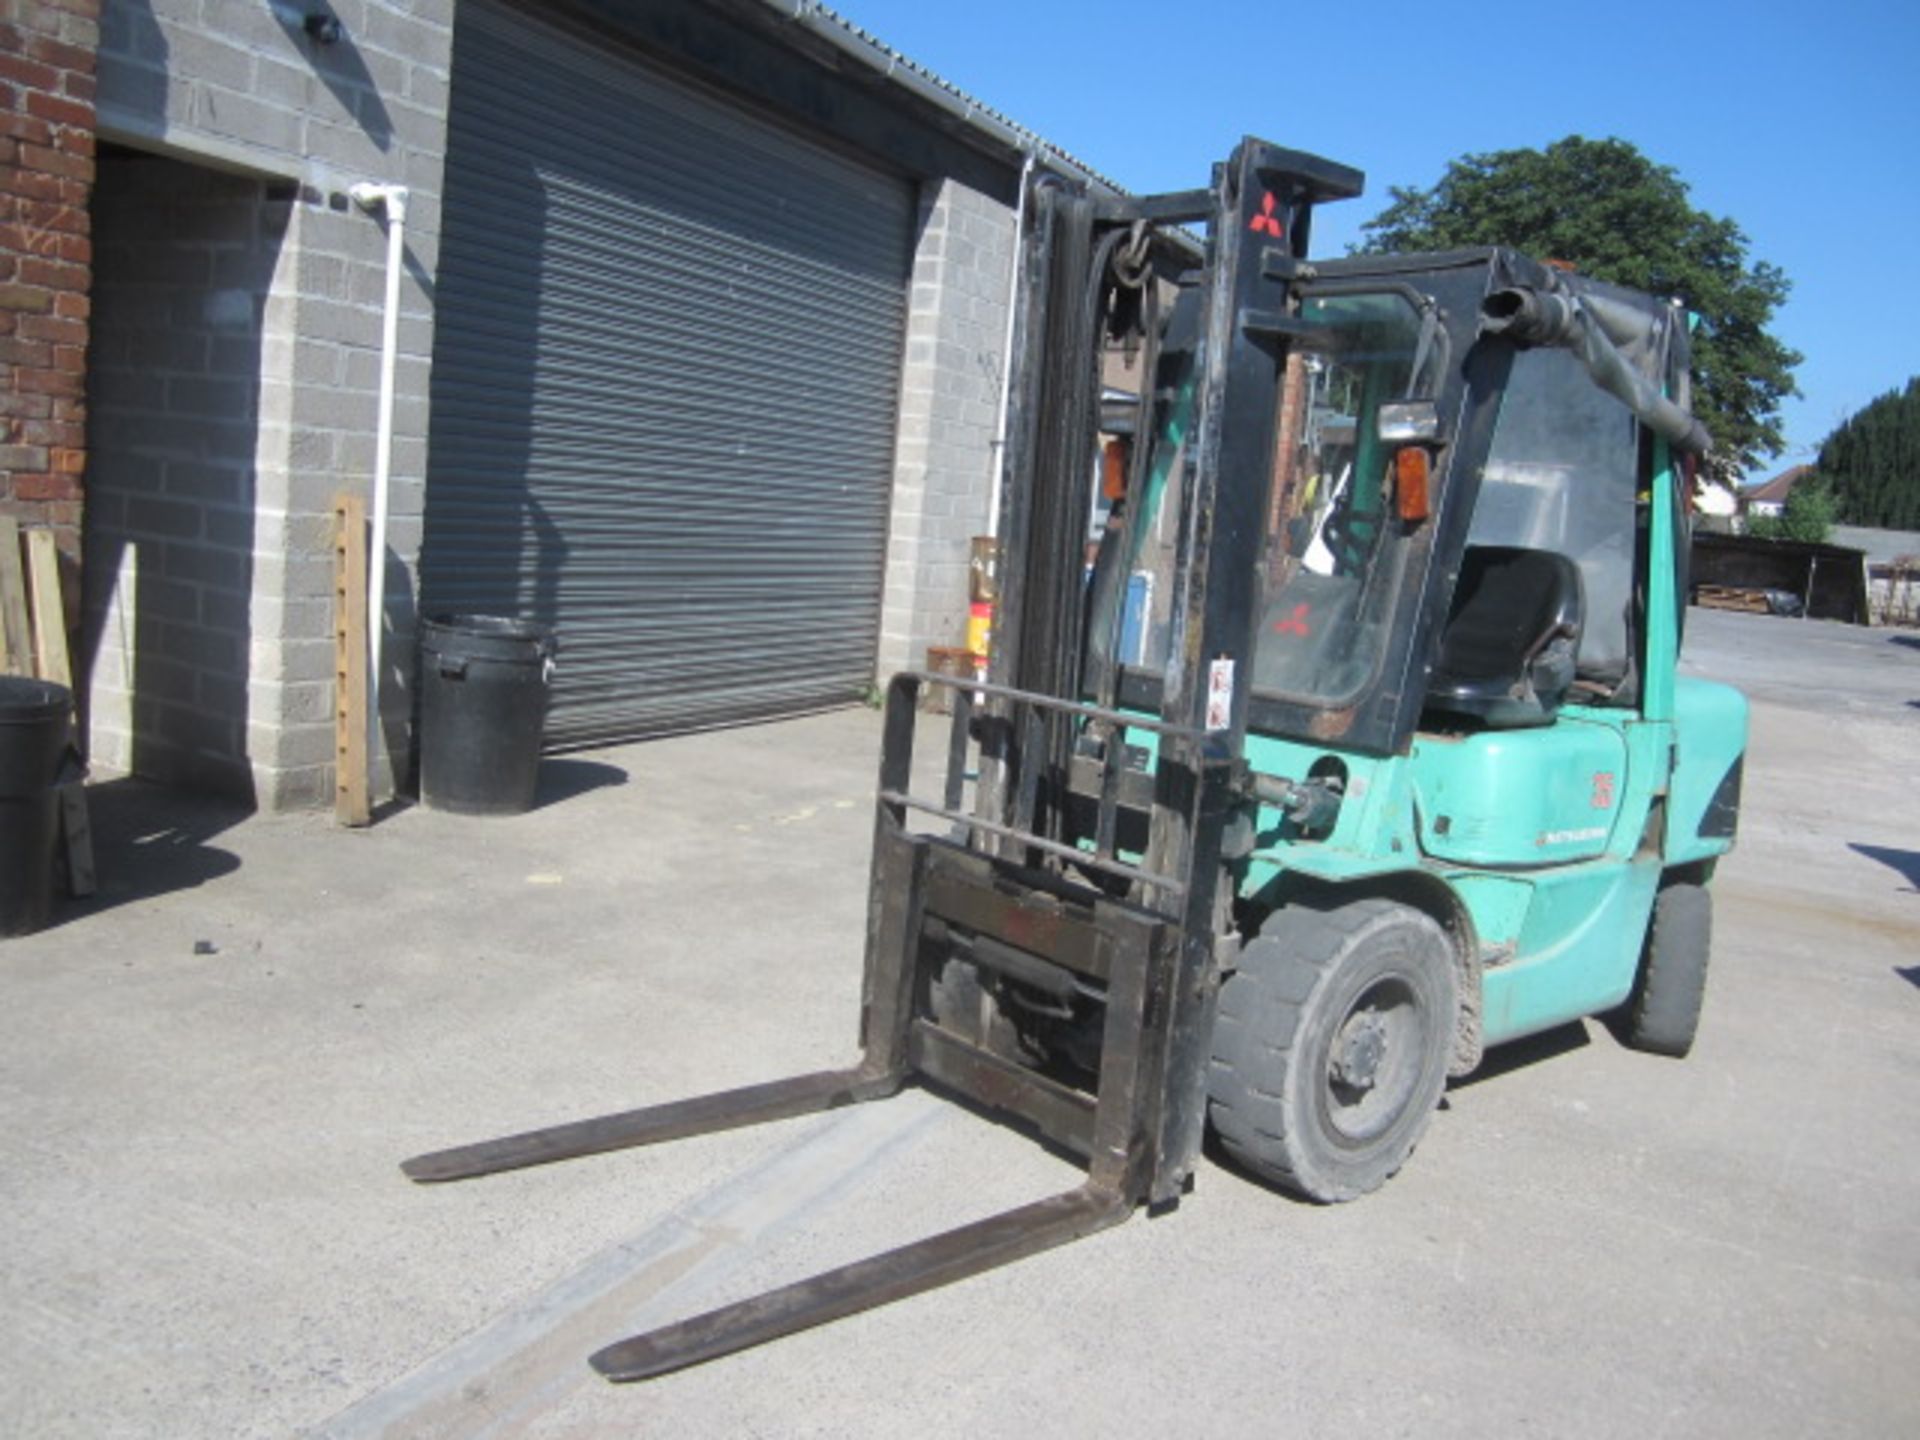 Mitsubishi 35 diesel powered duplex mast forklift truck, with side shift and all weather canopy,